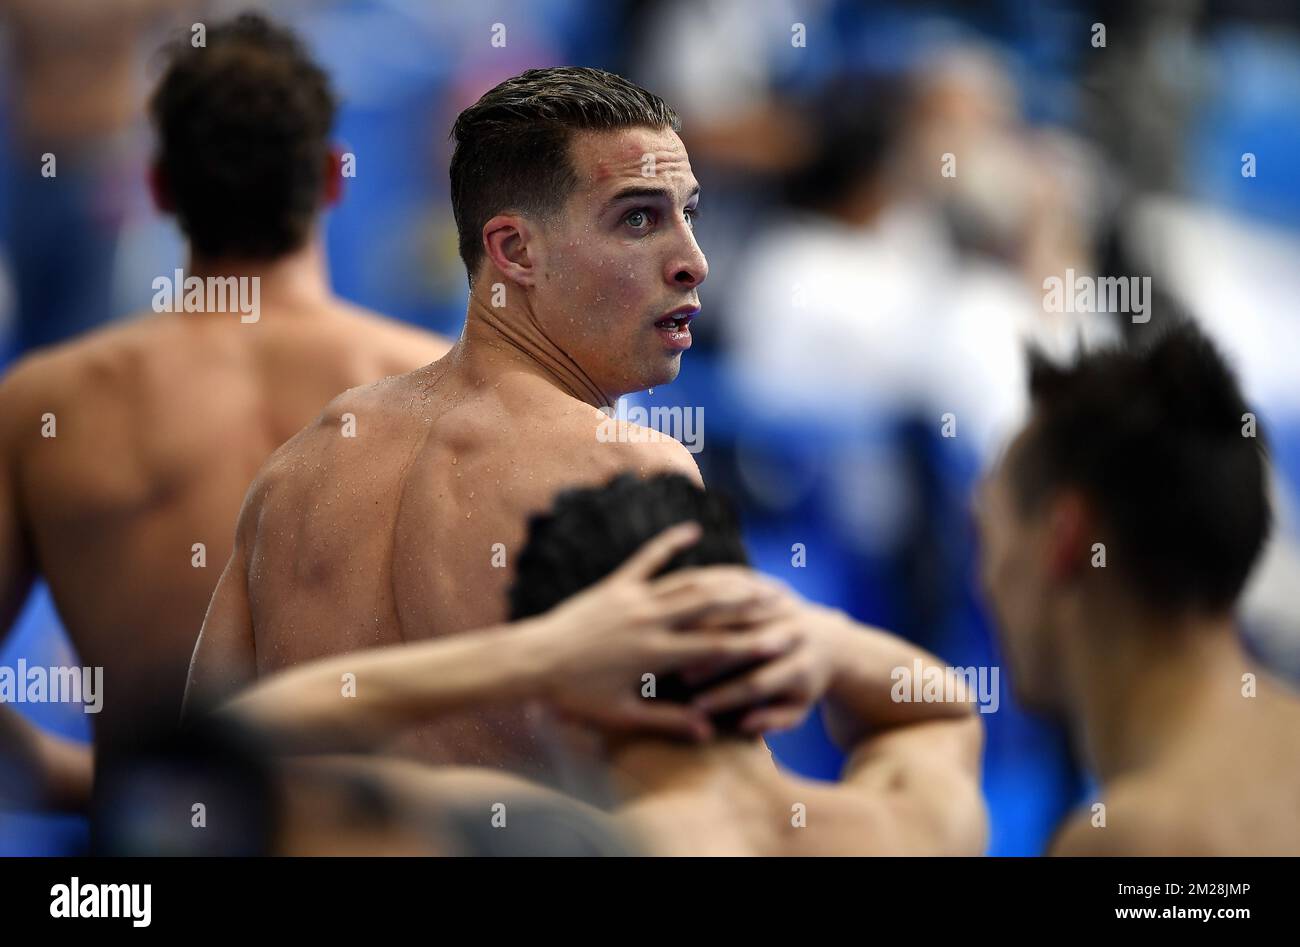 Belgian swimmer Pieter Timmers reacts after the heats of the men's 200m freestyle competition at the World Championships in Budapest, Hungary, Monday 24 July 2017. BELGA PHOTO ERIC LALMAND Stock Photo